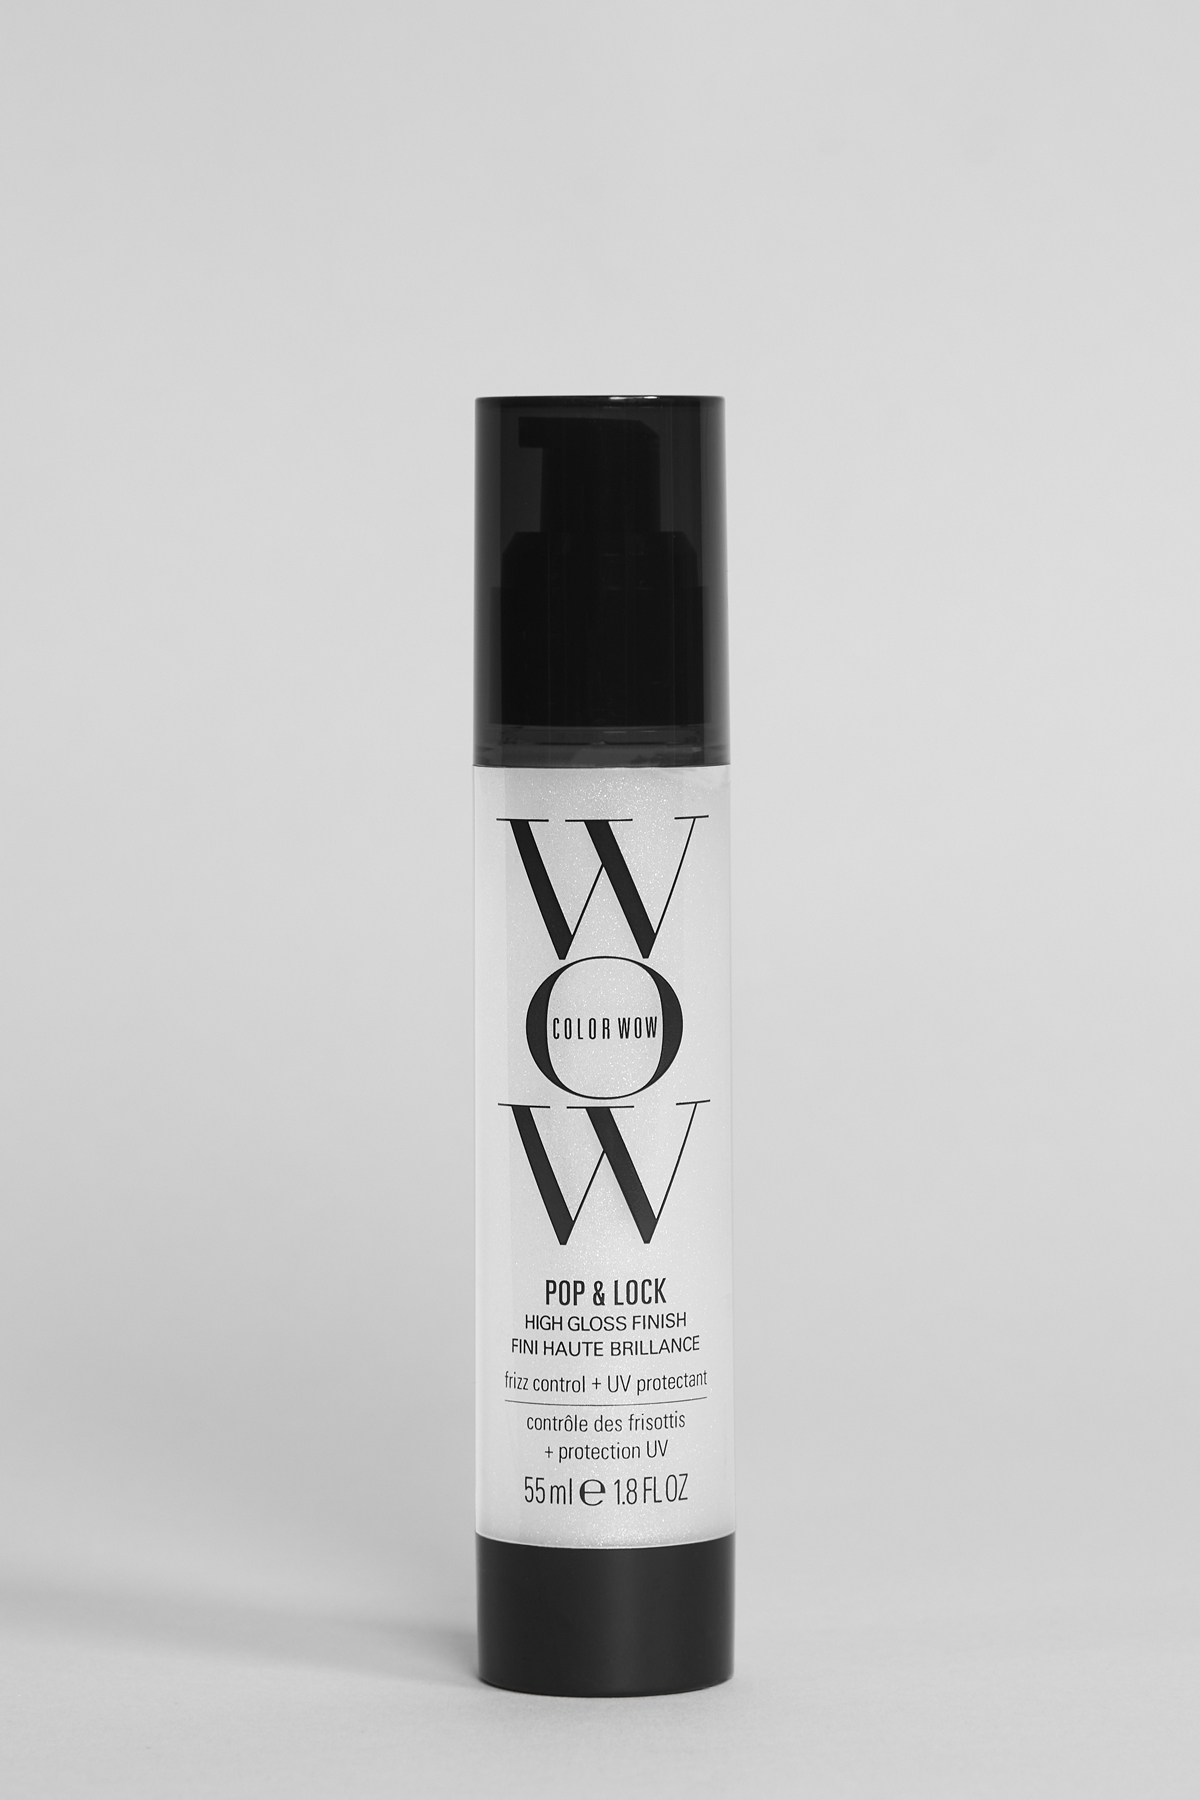 Color Wow Pop + Lock Frizz Control + Glossing Serum shot in Marie Claire